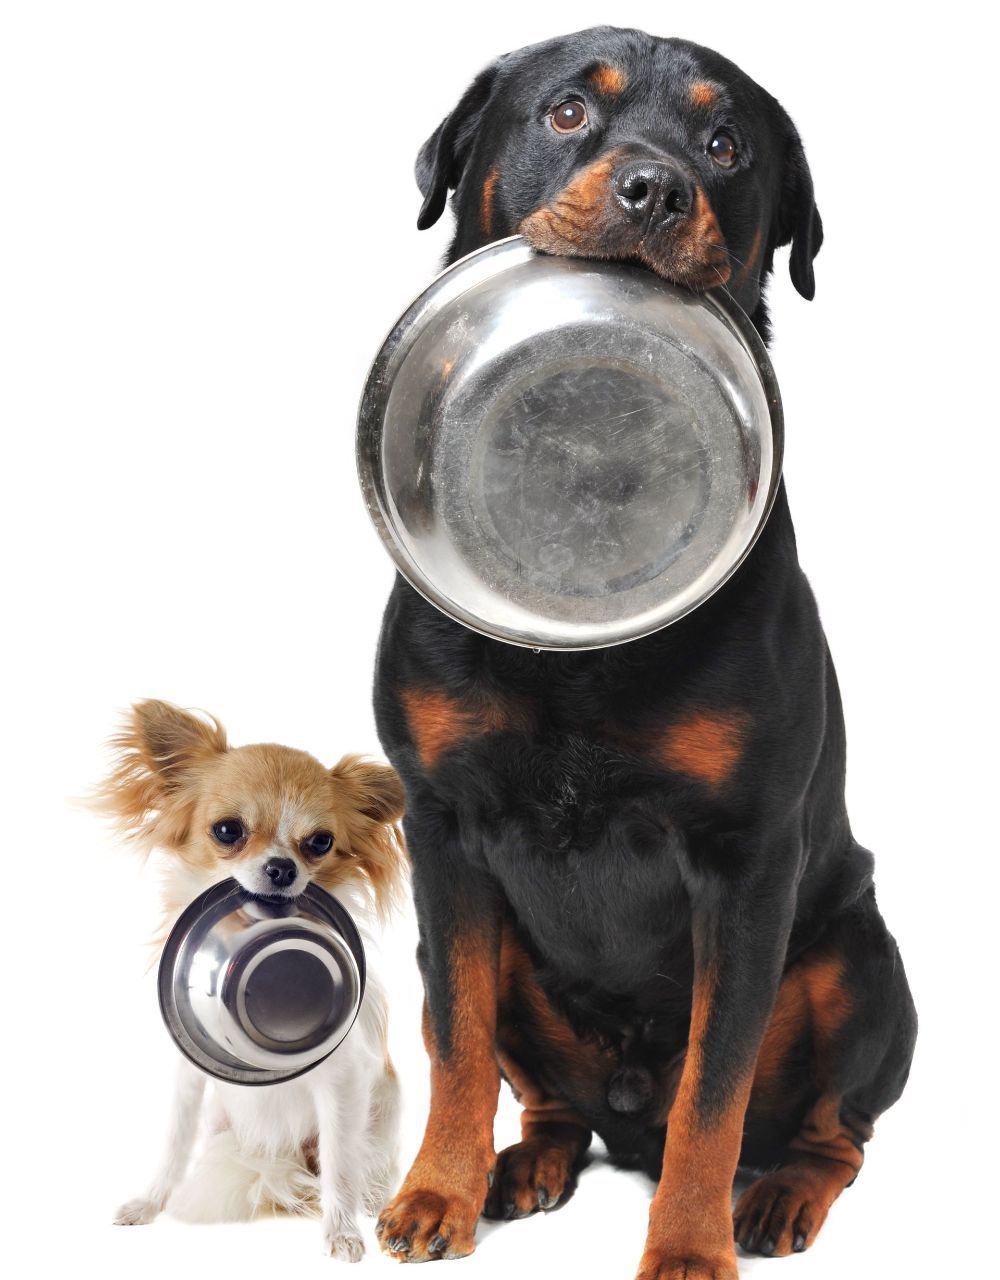 A dog is holding a bowl in its mouth next to another dog